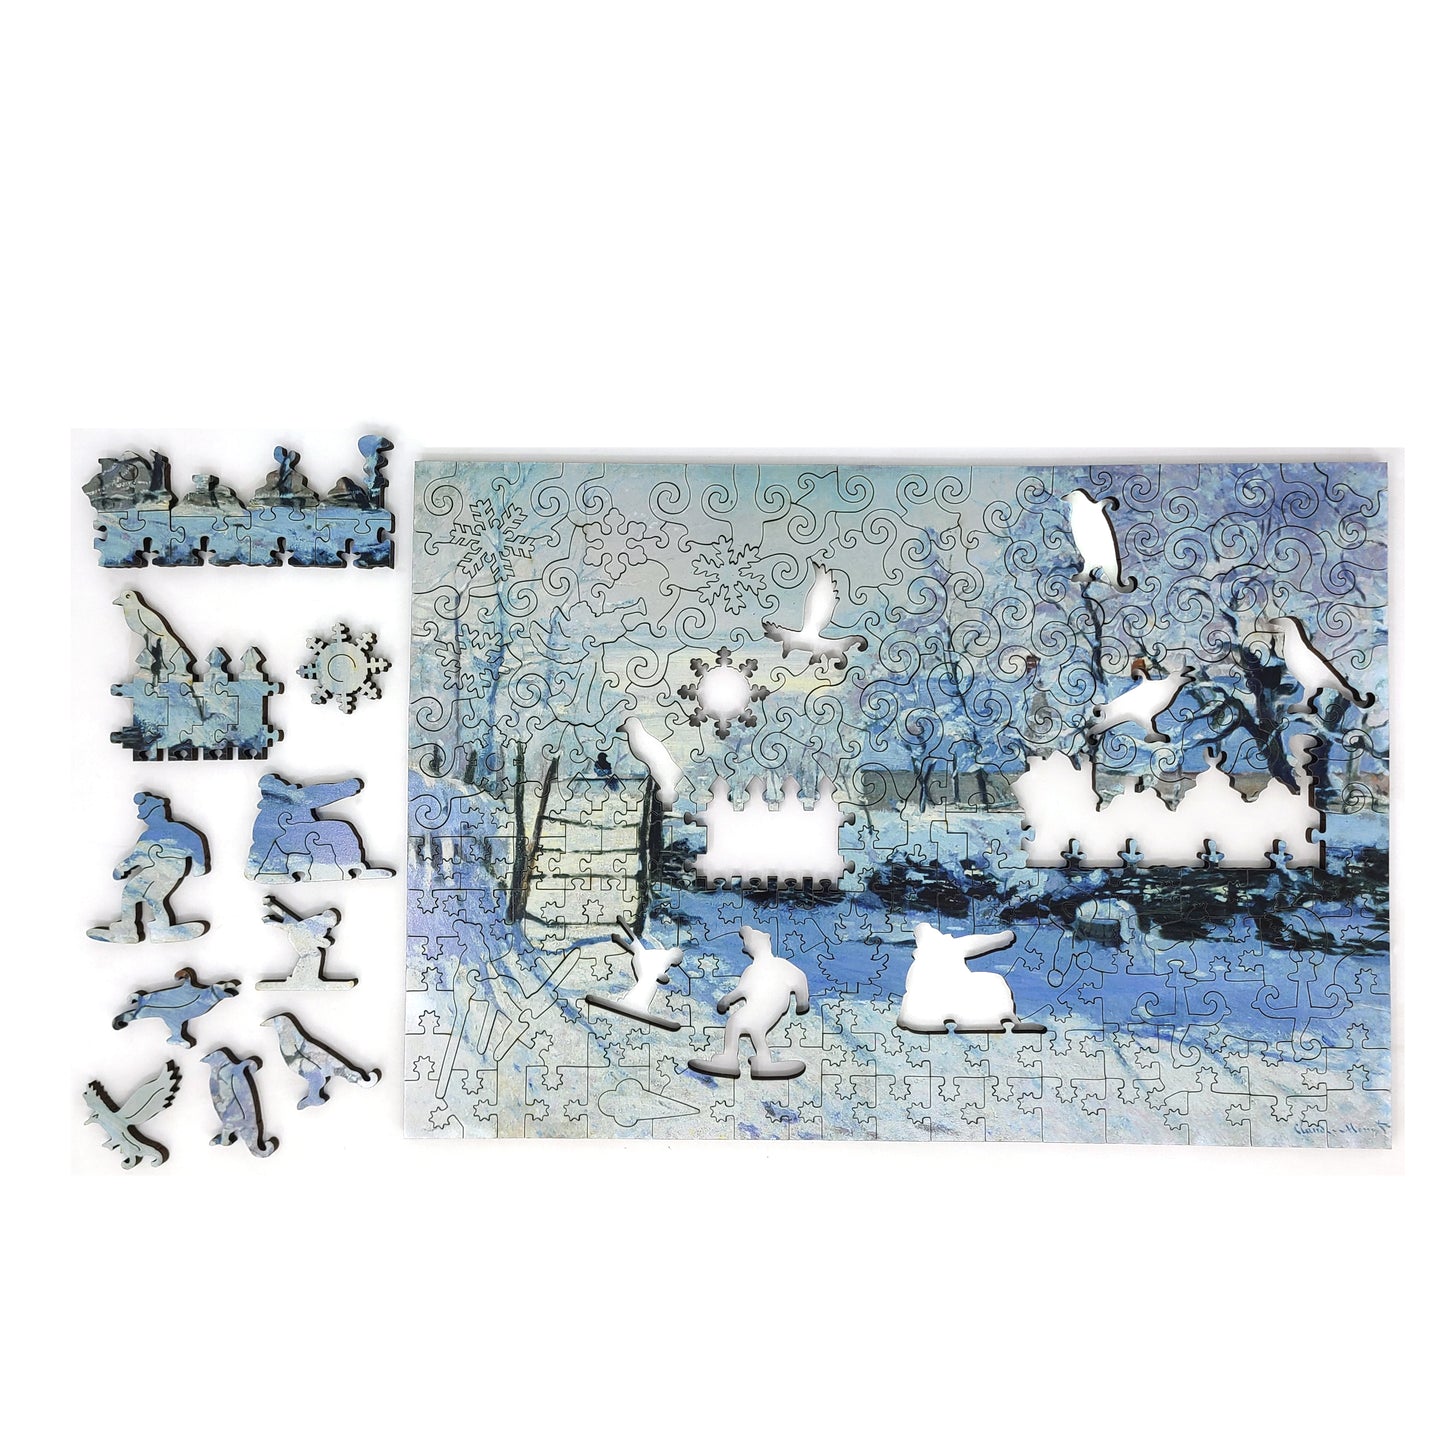 Large Format Wooden Jigsaw Puzzle with Uniquely Shaped Pieces for Seniors and Adults - 210 Pieces - The Magpie